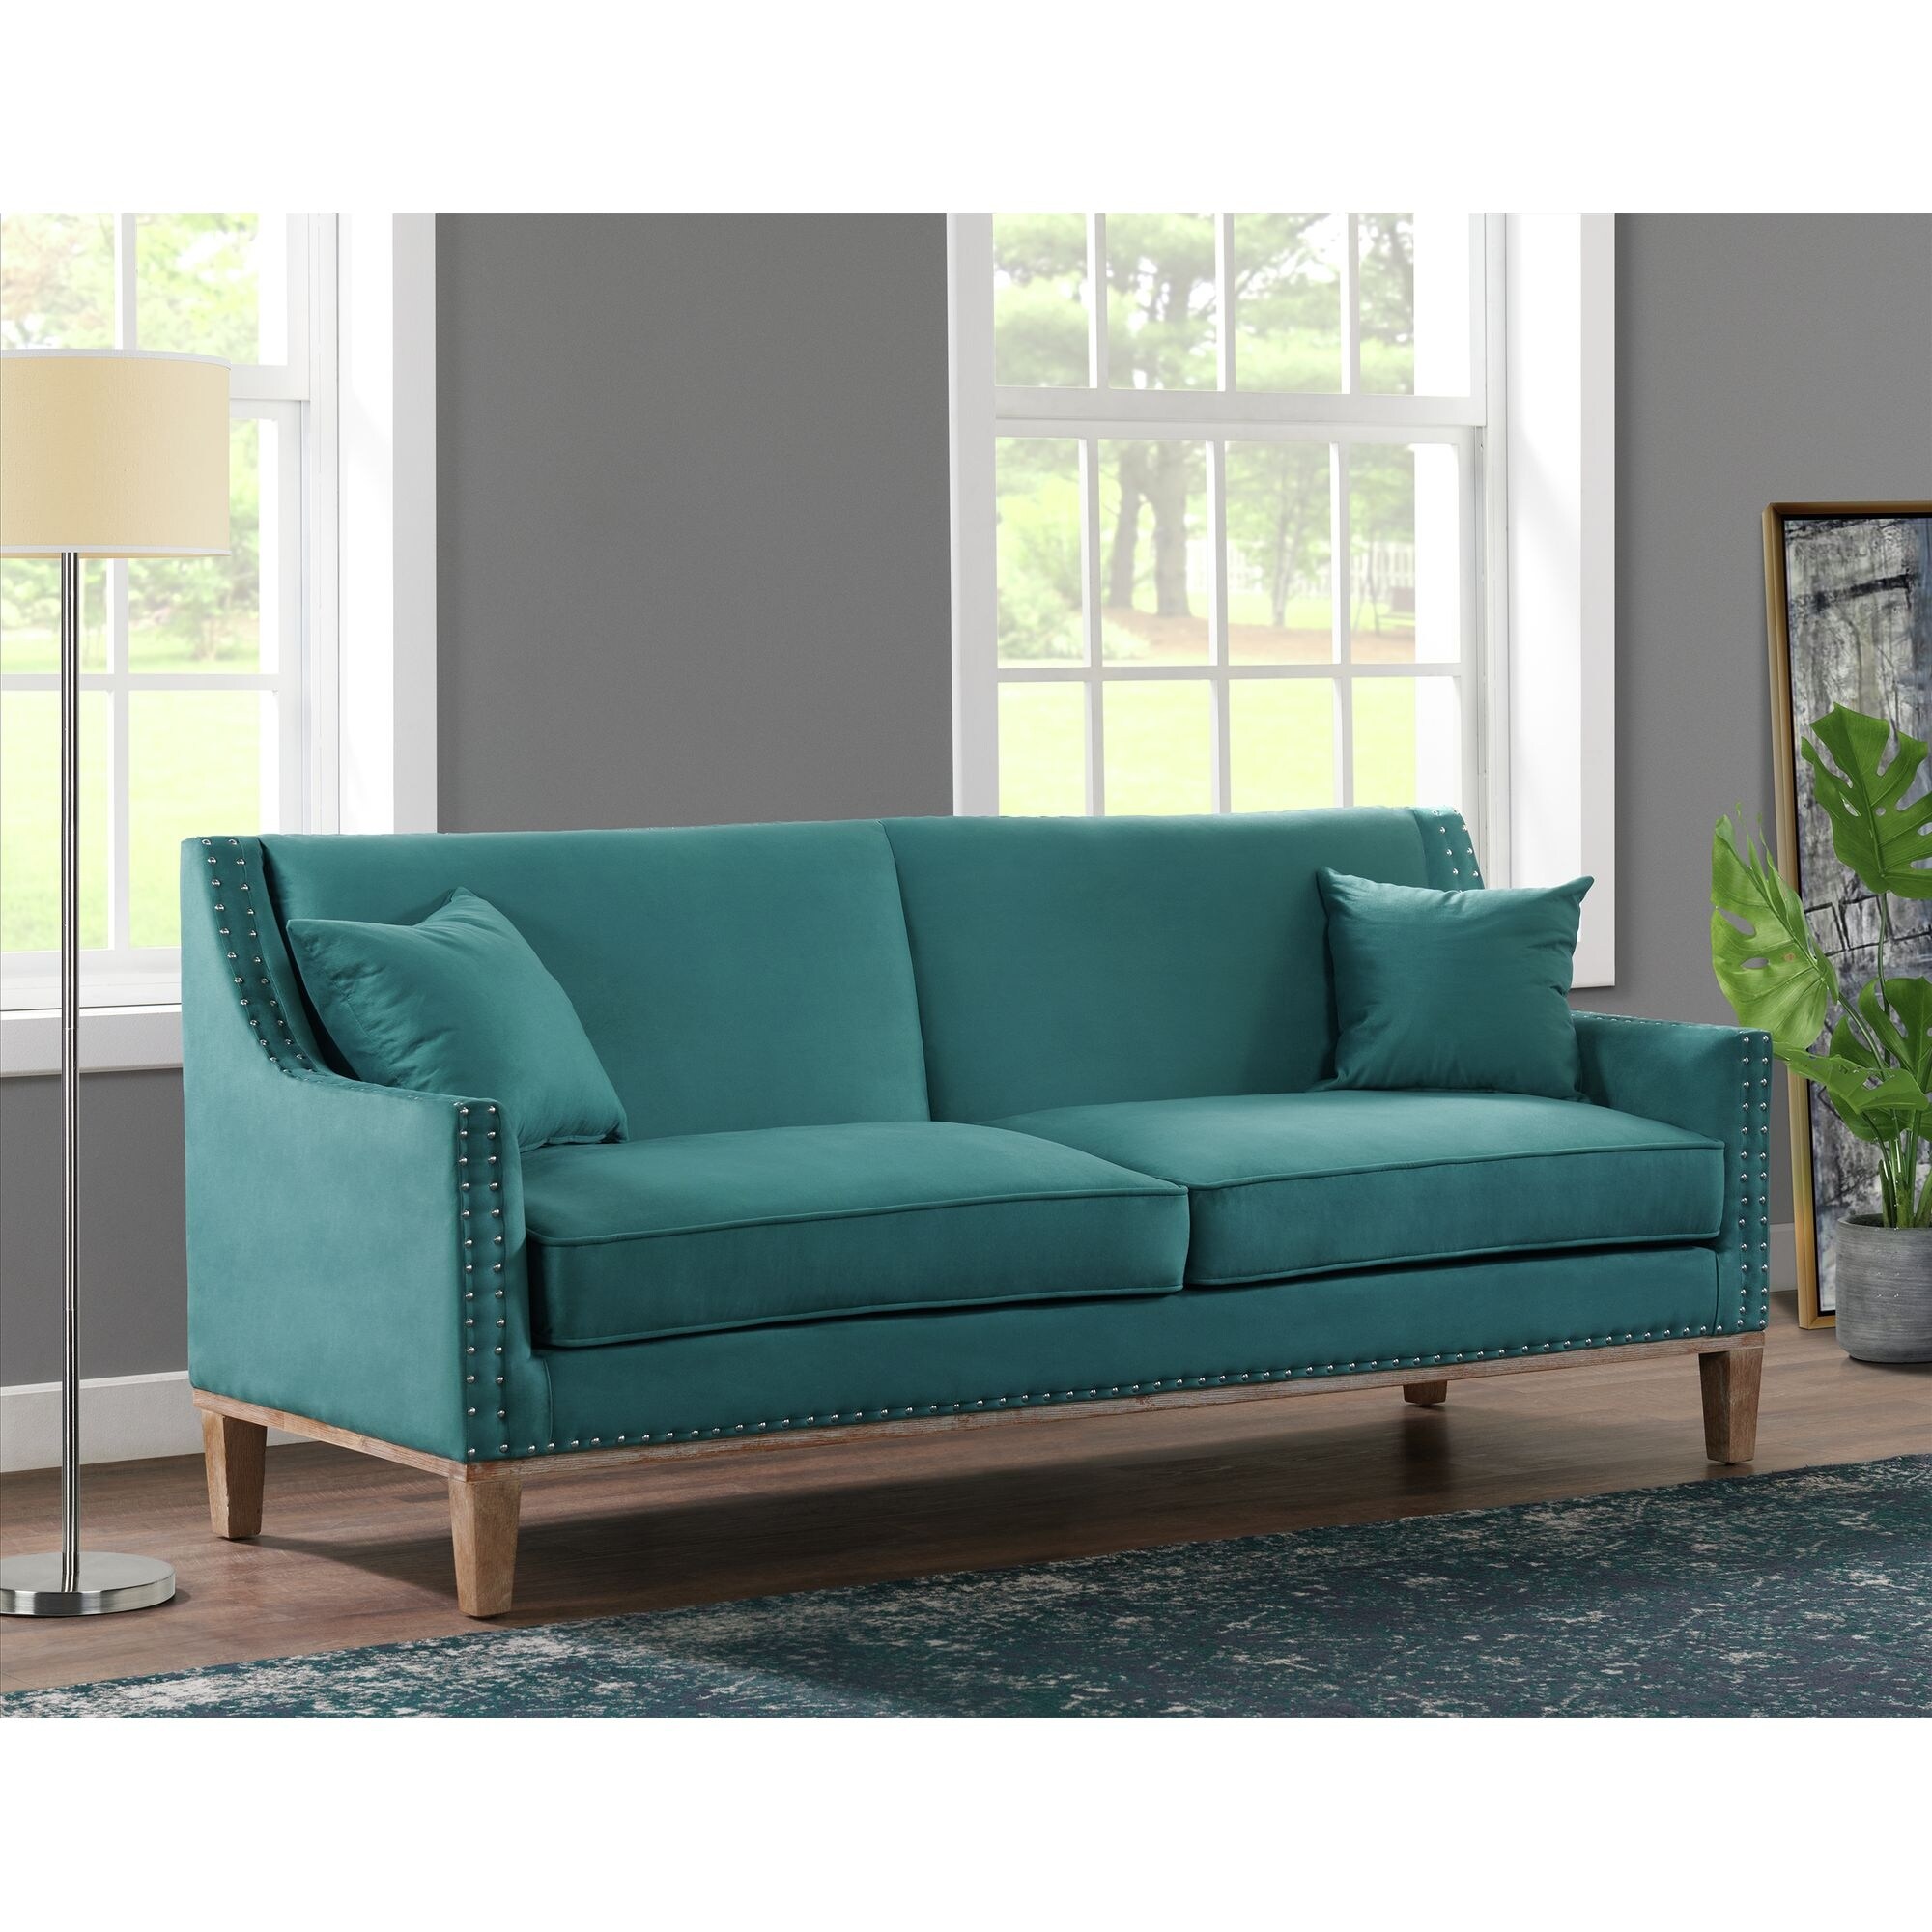 Picket House Furnishings Aster Sofa in Charcoal